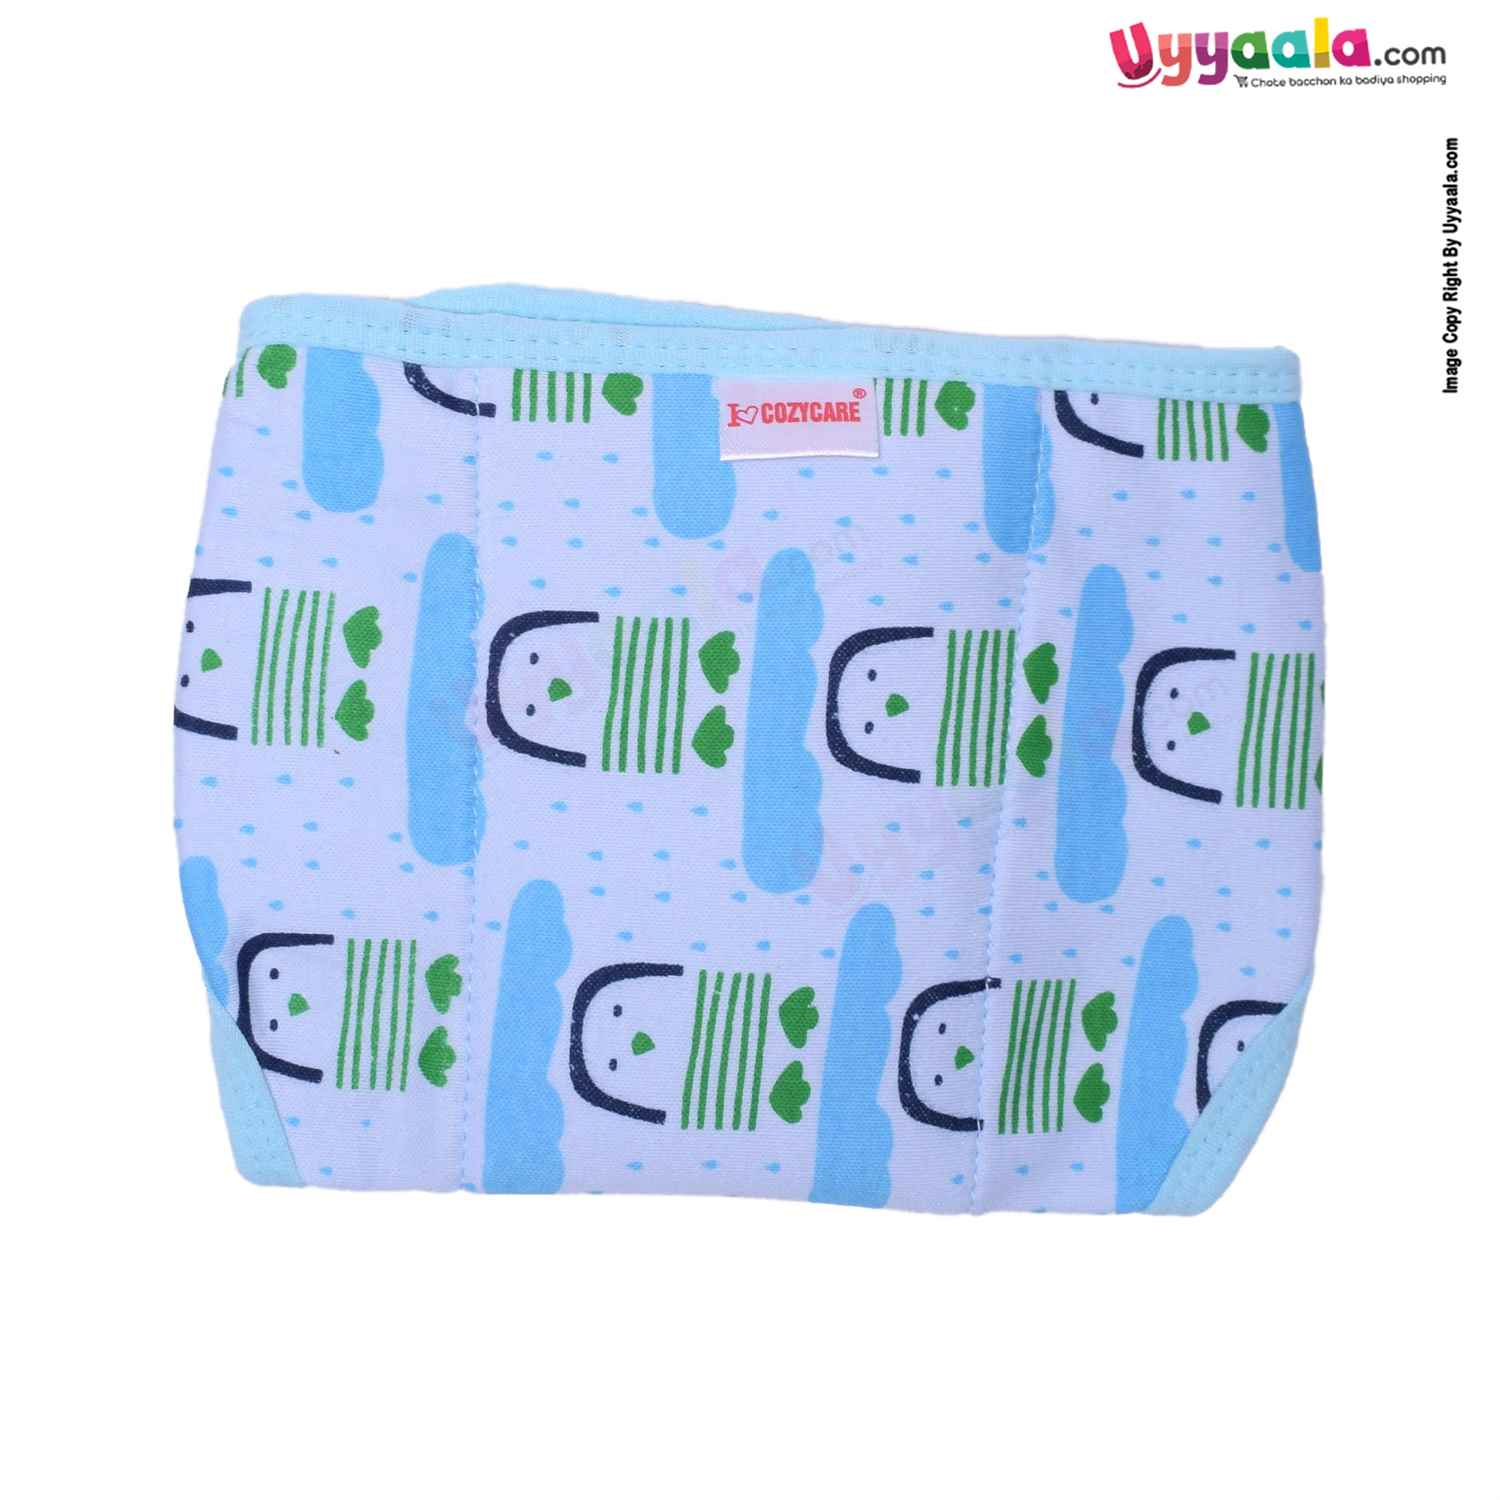 COZYCARE Washable Diapers Hosiery Velcro Penguin Print Blue, Pink & Animal Print Green 3P Set (SS)